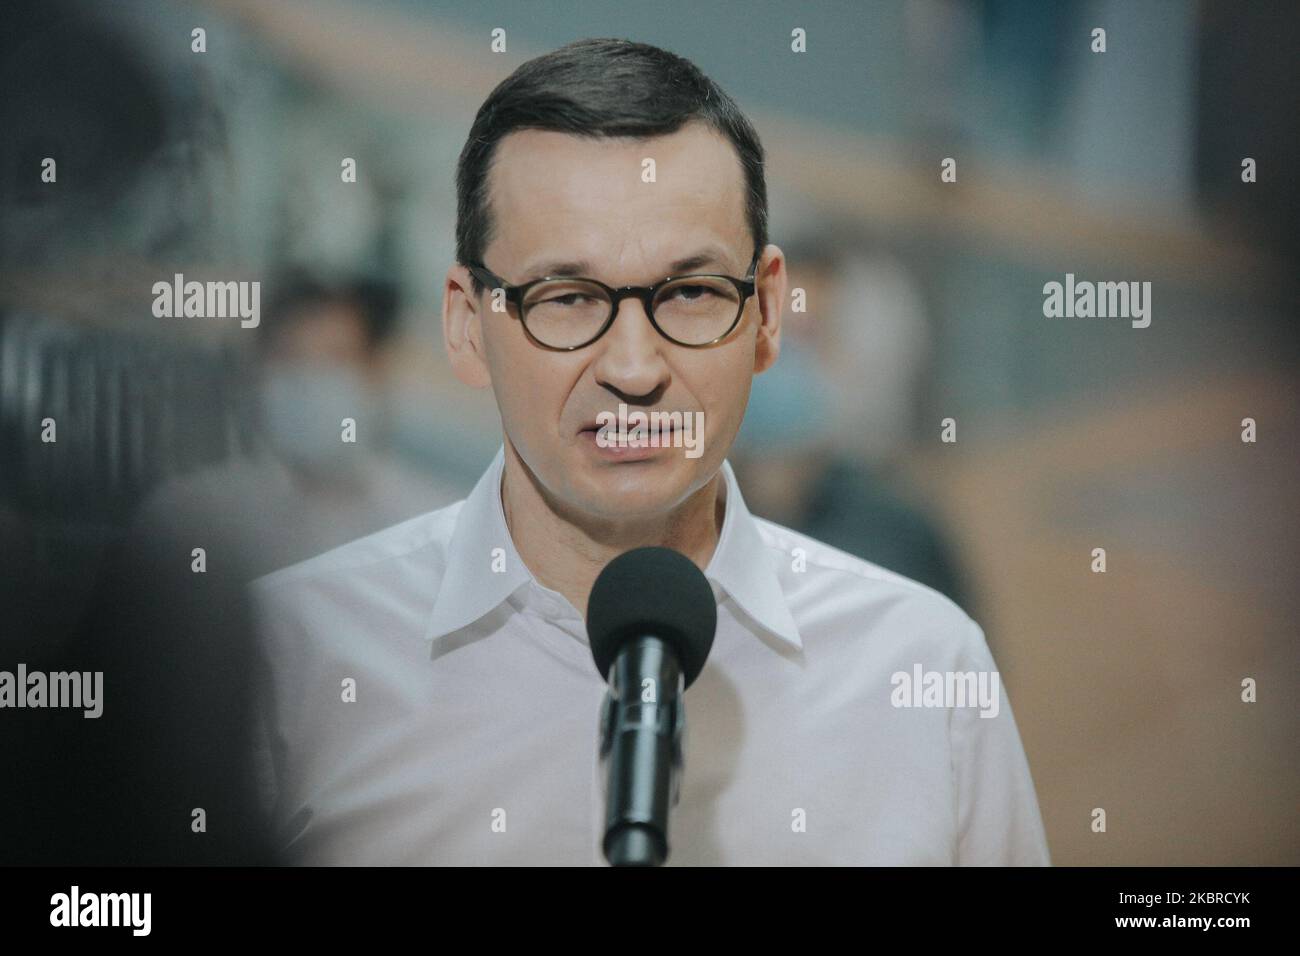 Prime Minister Mateusz Morawiecki came to Wroc?aw on June 20, 2020. He visited Scanway and congratulated them on their technological development. (Photo by Krzysztof Zatycki/NurPhoto) Stock Photo